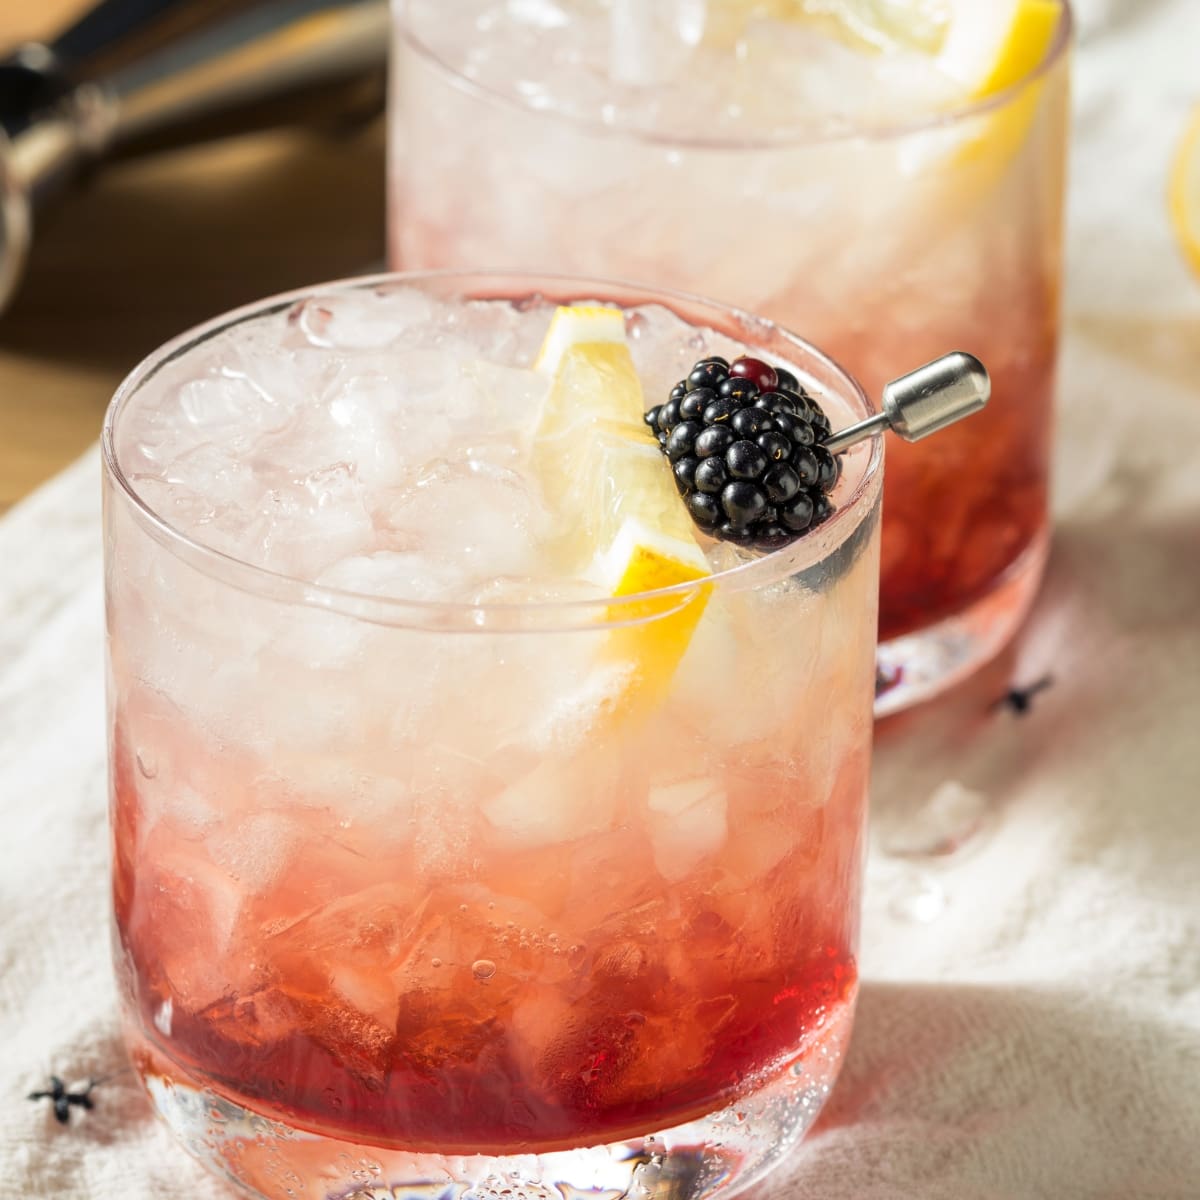 Bramble cocktail in a glass with crushed ice with blackberries and lemon slice garnish. 